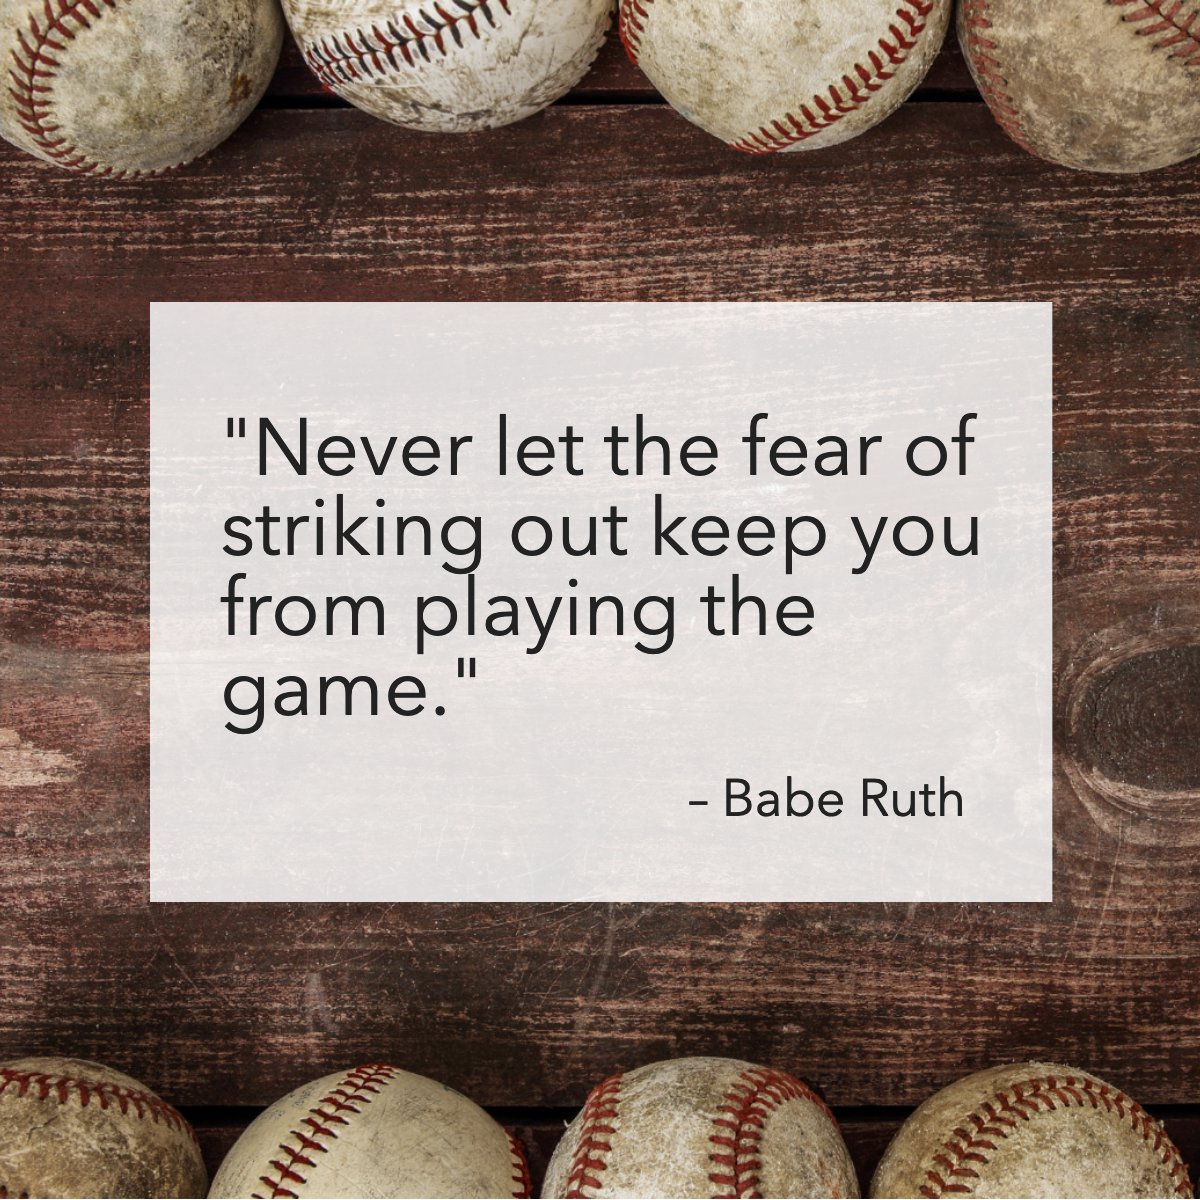 I guess we just have to keep playing! 🙏

Share with us a motivational quote! 💭

#inspiring #motivation #sports #baseball #baberuth #quote
 #boyntonbeachrealestate #southfloridarealtor #palmbeachrealtor #marketreport #homedesigntrends #homeforsaleflorida